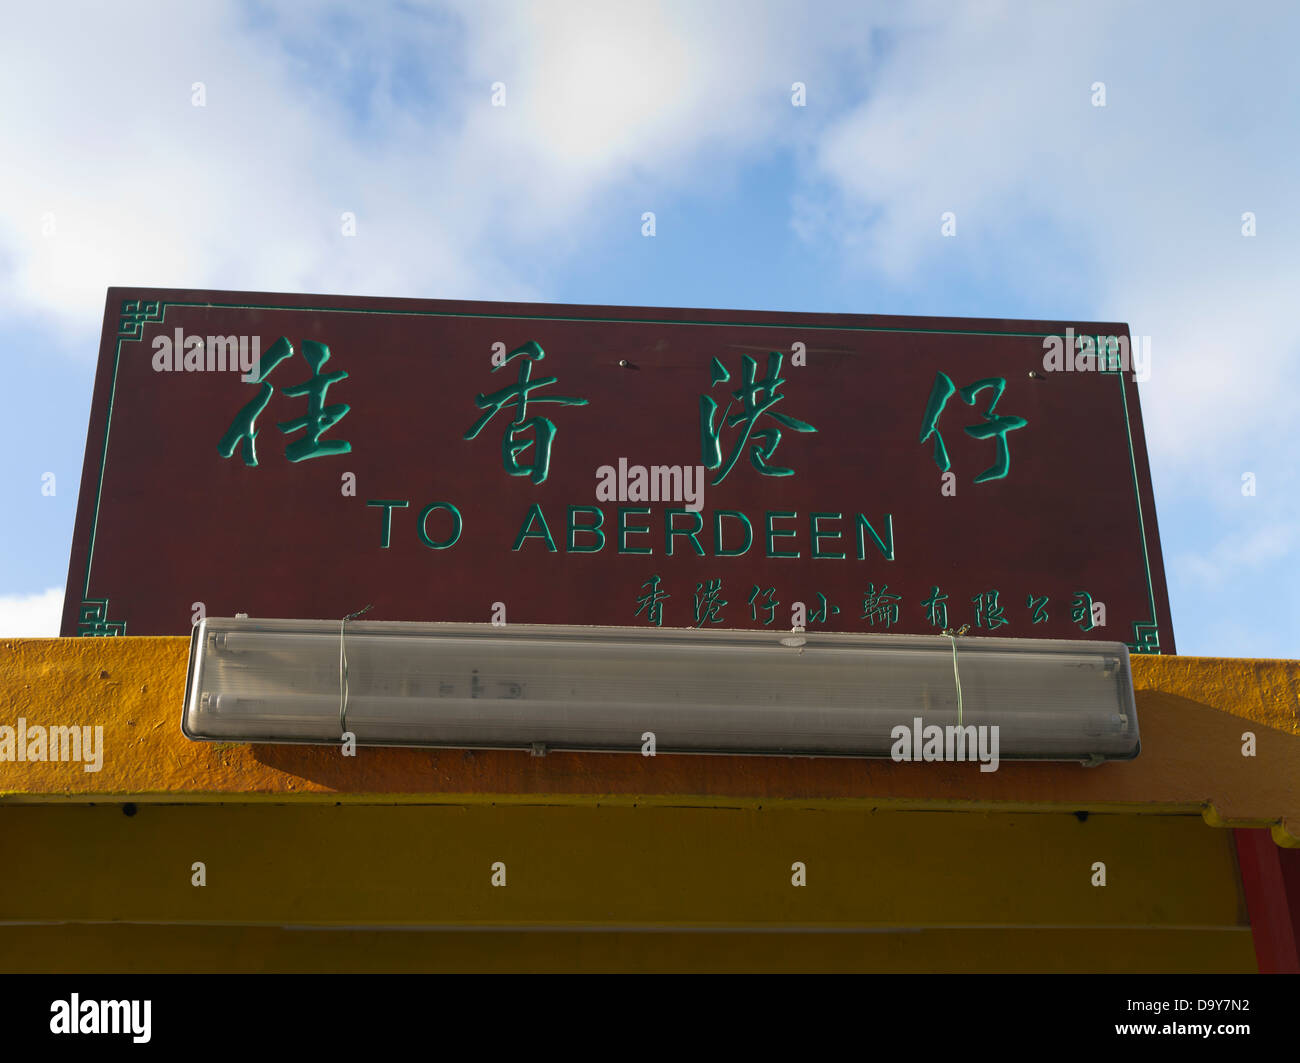 dh Aberdeen Harbour ABERDEEN HONG KONG Chinese bilingual calligraph letters and English sign Ap Lei Chau ferry signpost calligraphy letter harbor Stock Photo